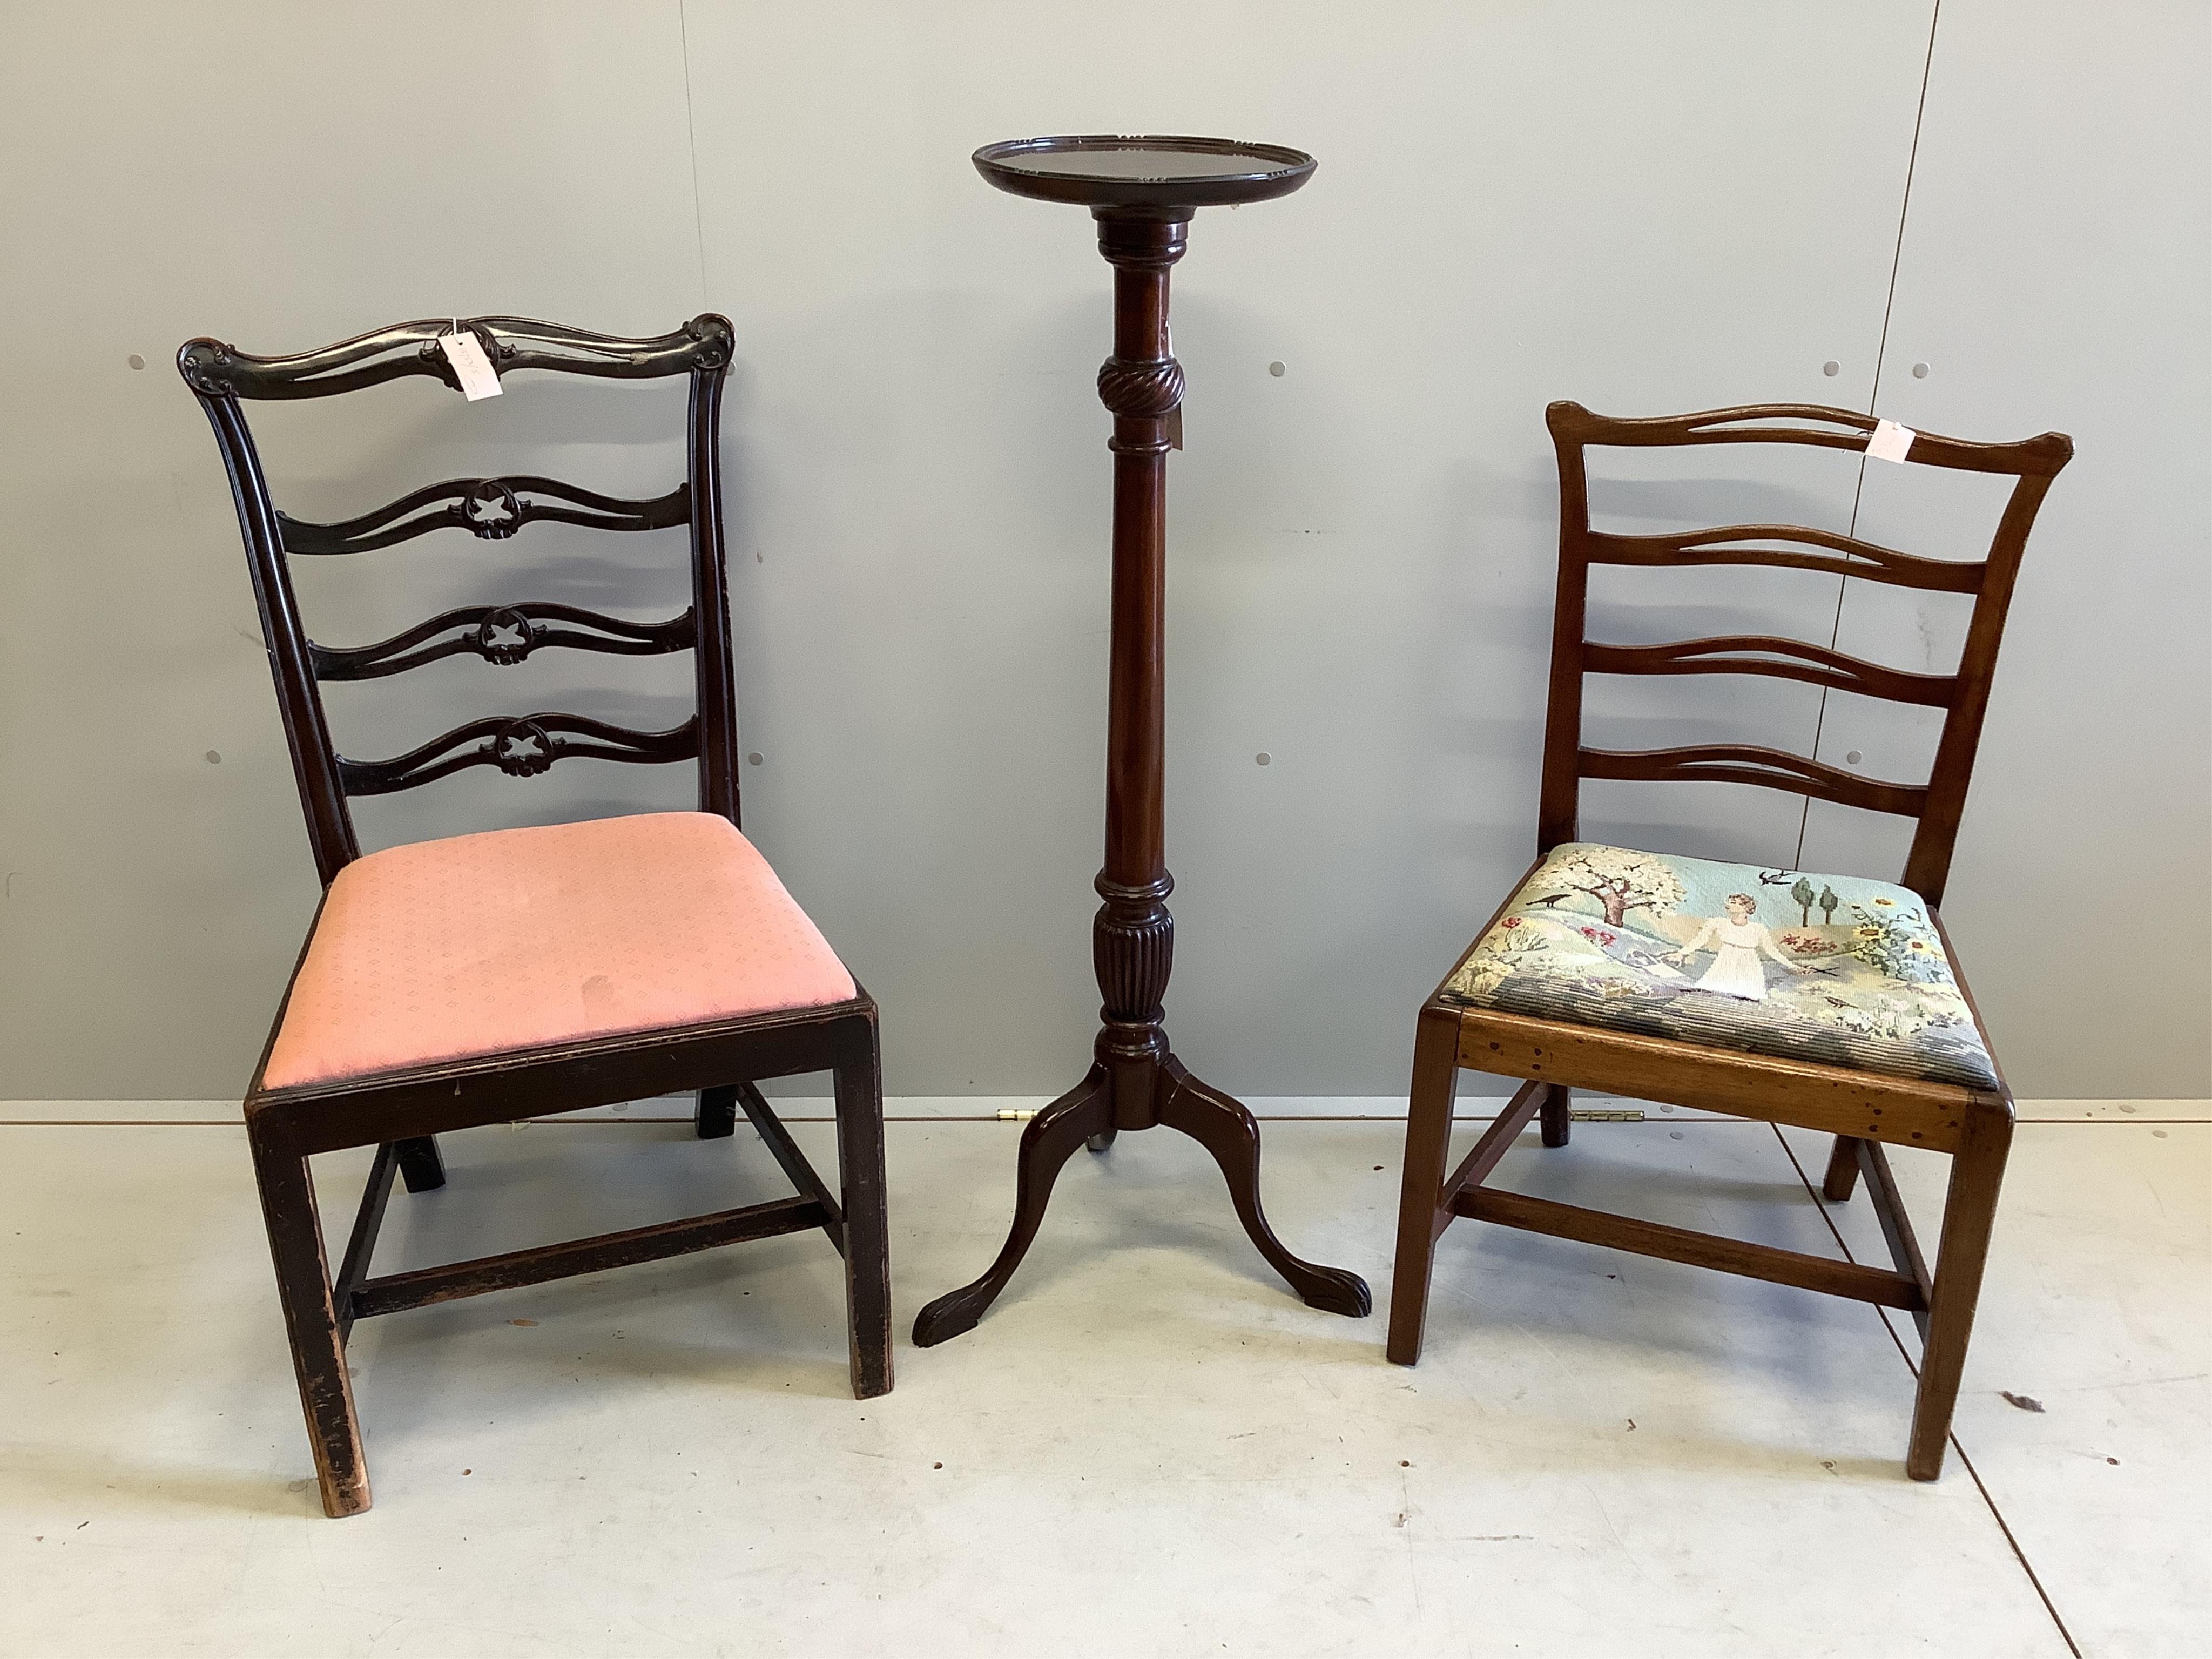 A 19th century mahogany ladderback dining chair with needlework seat, another ladderback chair and a